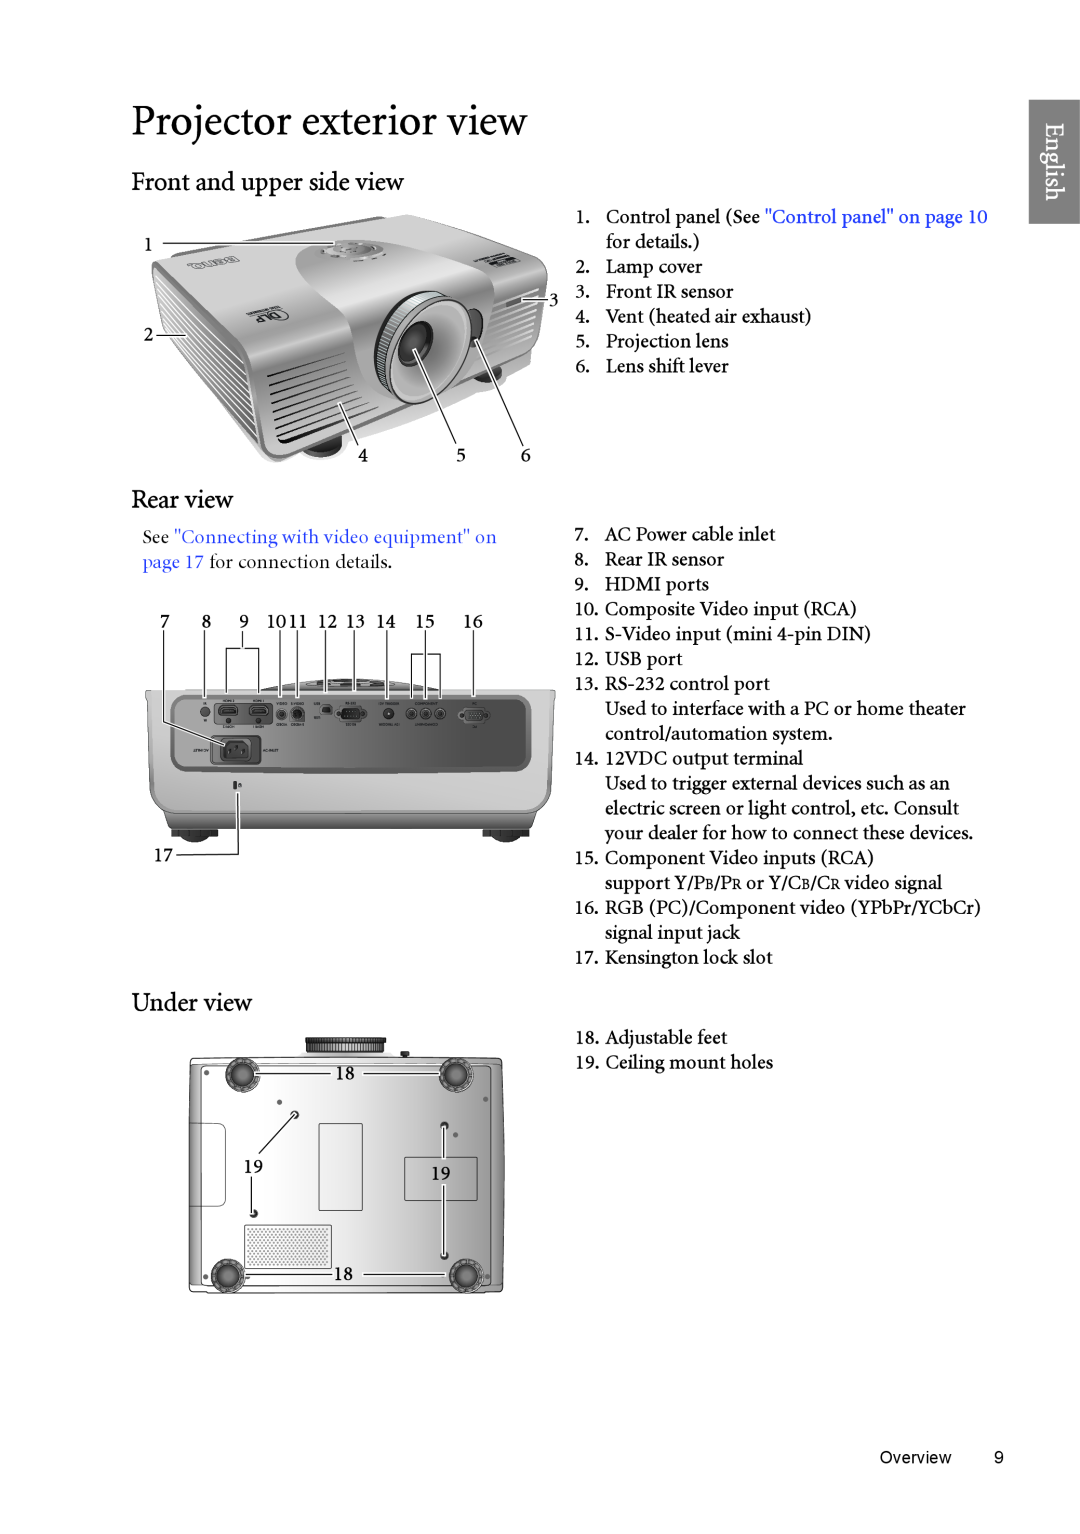 BenQ W6500 user manual Projector exterior view, Front and upper side view, Rear view, Under view 